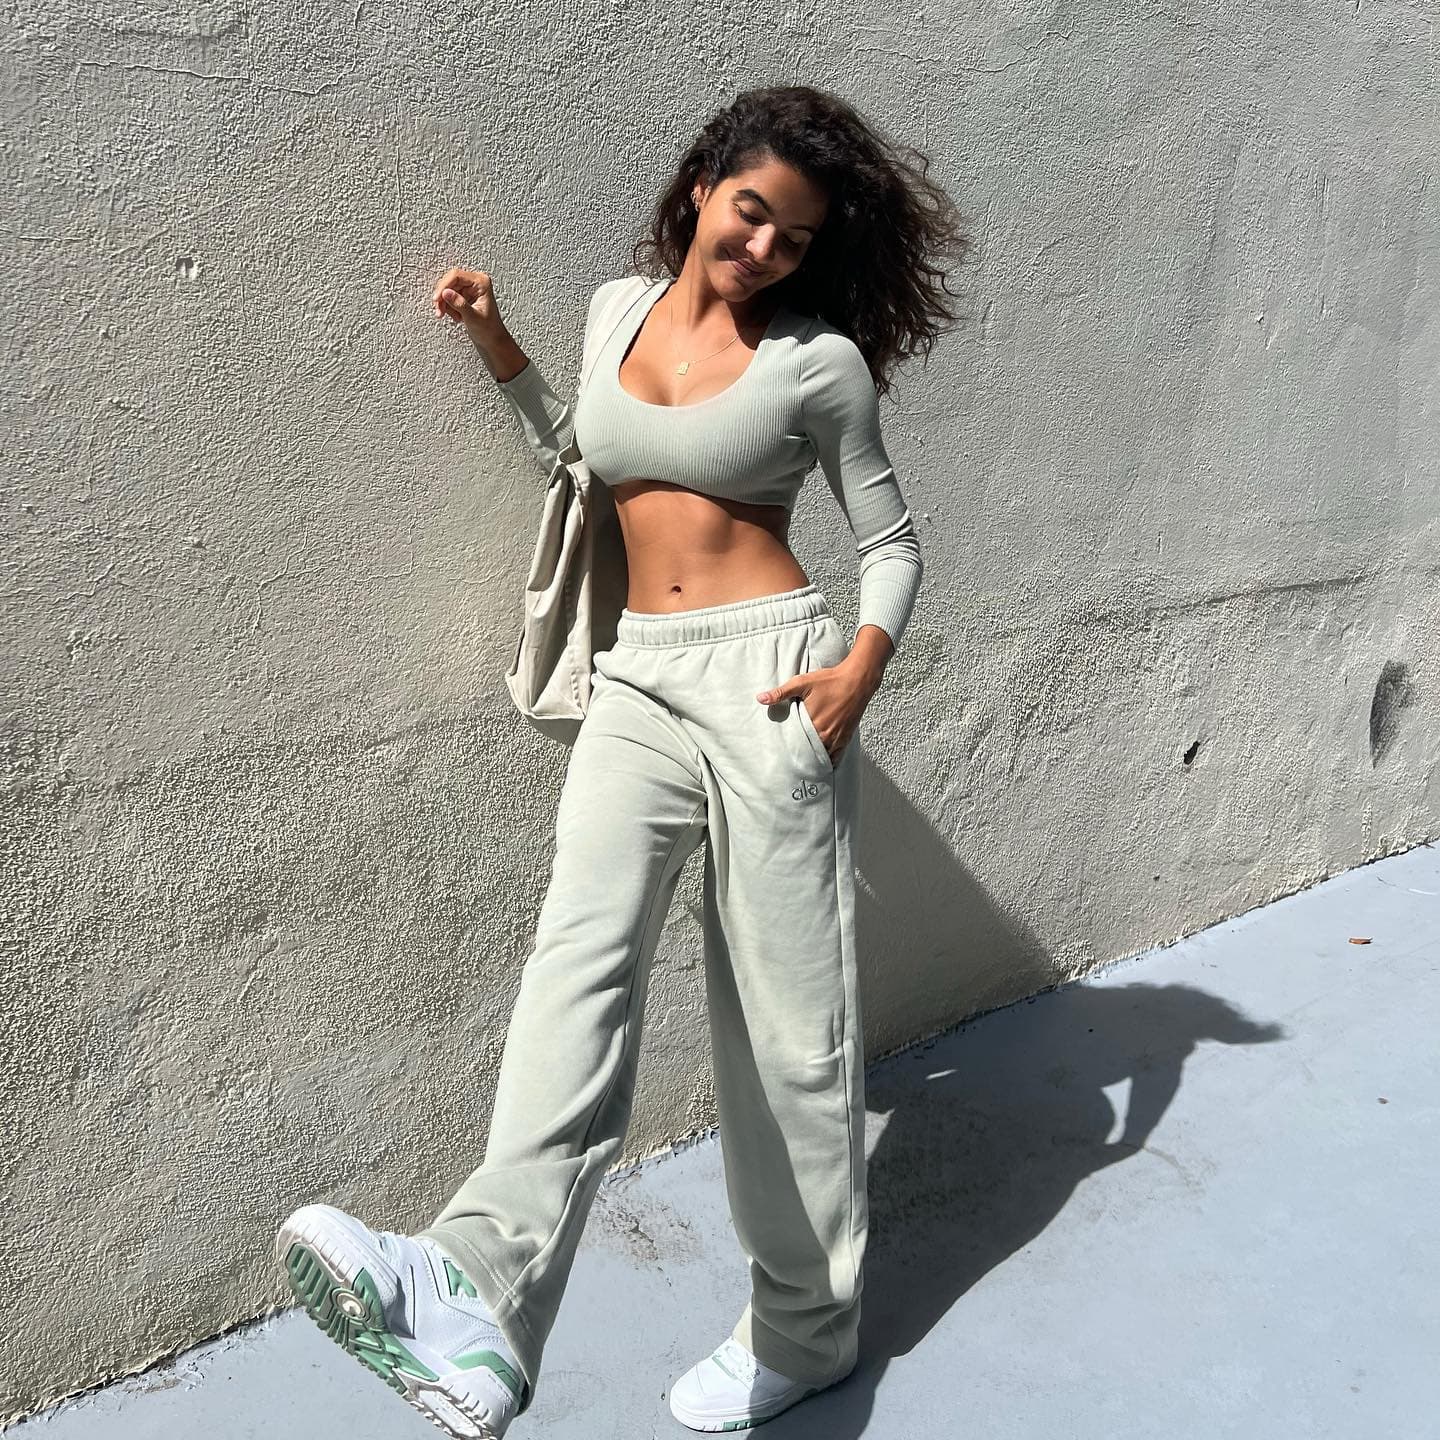 @juliamuniz wearing a pair of straight-leg sweatpants in a light sage color with a matching ribbed long sleeve bra top while walking down a sidewalk.  